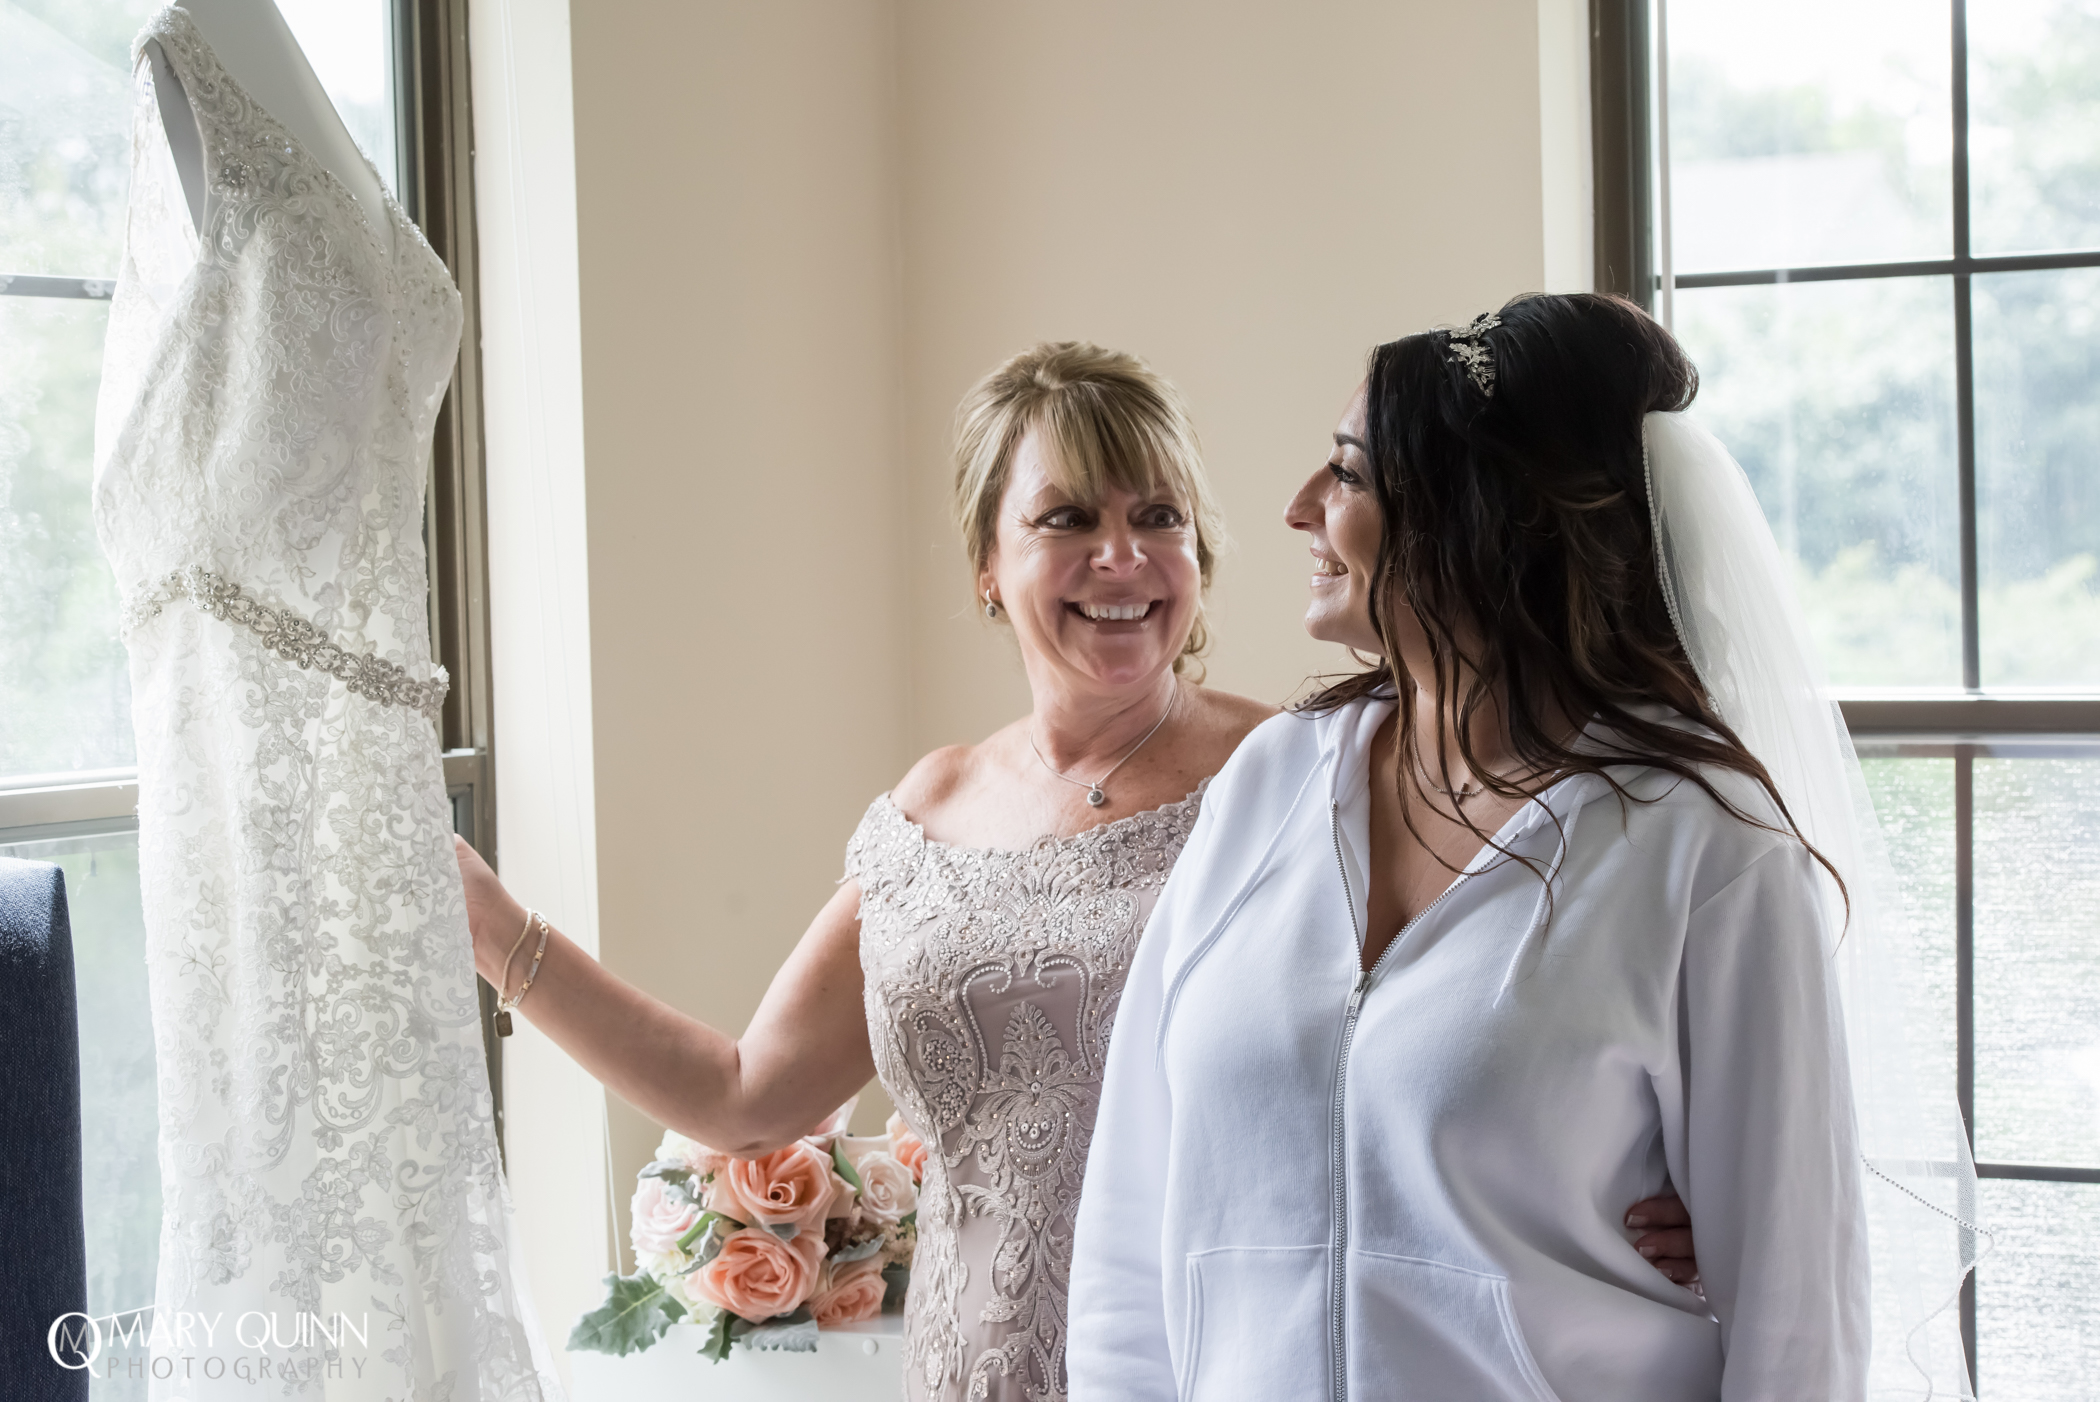 Best Wedding Photographer at the Merion Cinnaminson New Jersey